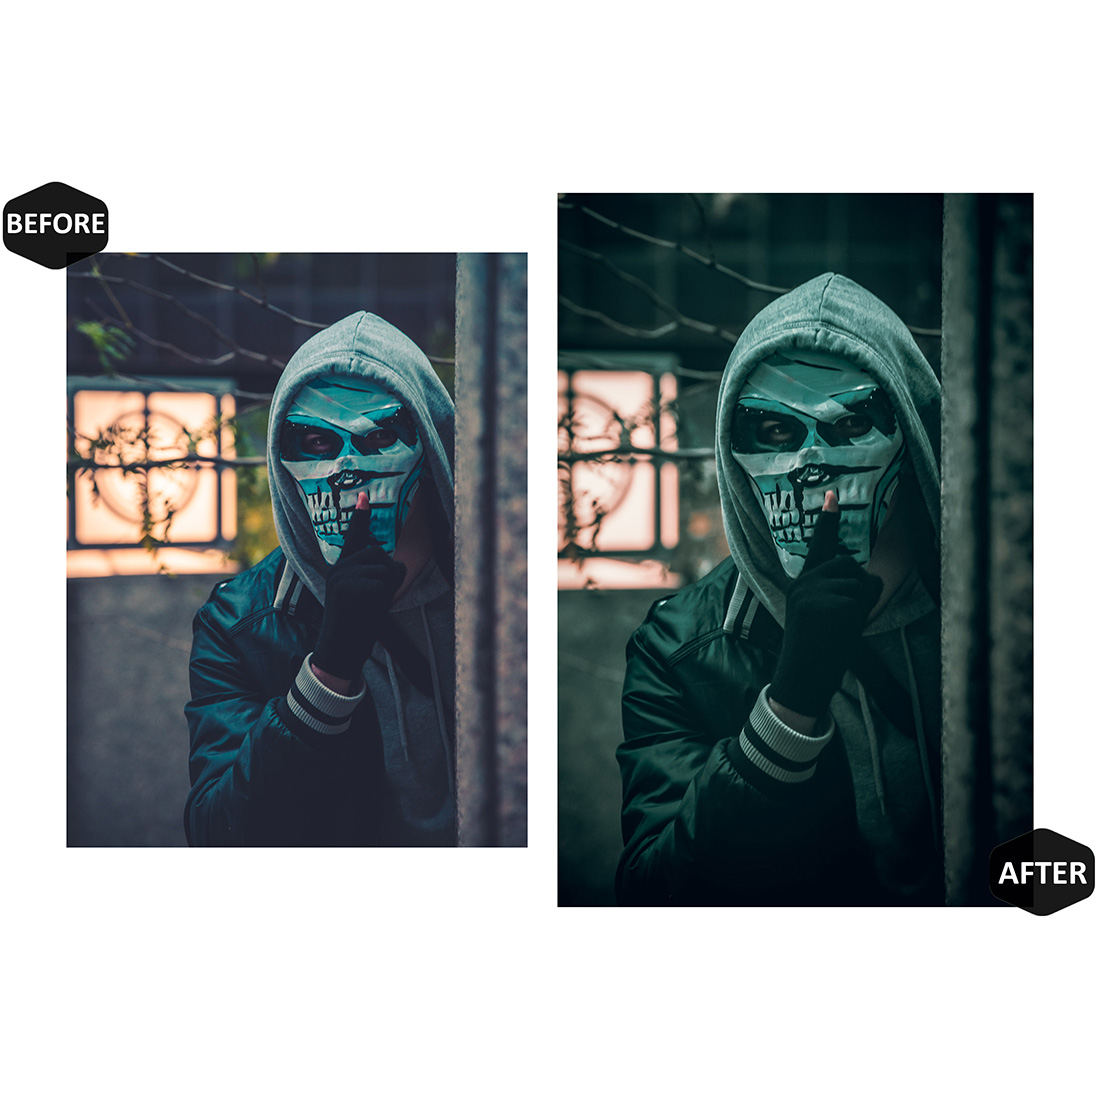 12 Photoshop Actions, Cinematic Halloween 2022 Ps Action, Film ACR Preset, Cinema Ps Filter, Atn Portrait And Lifestyle Theme For Instagram, Blogger preview image.